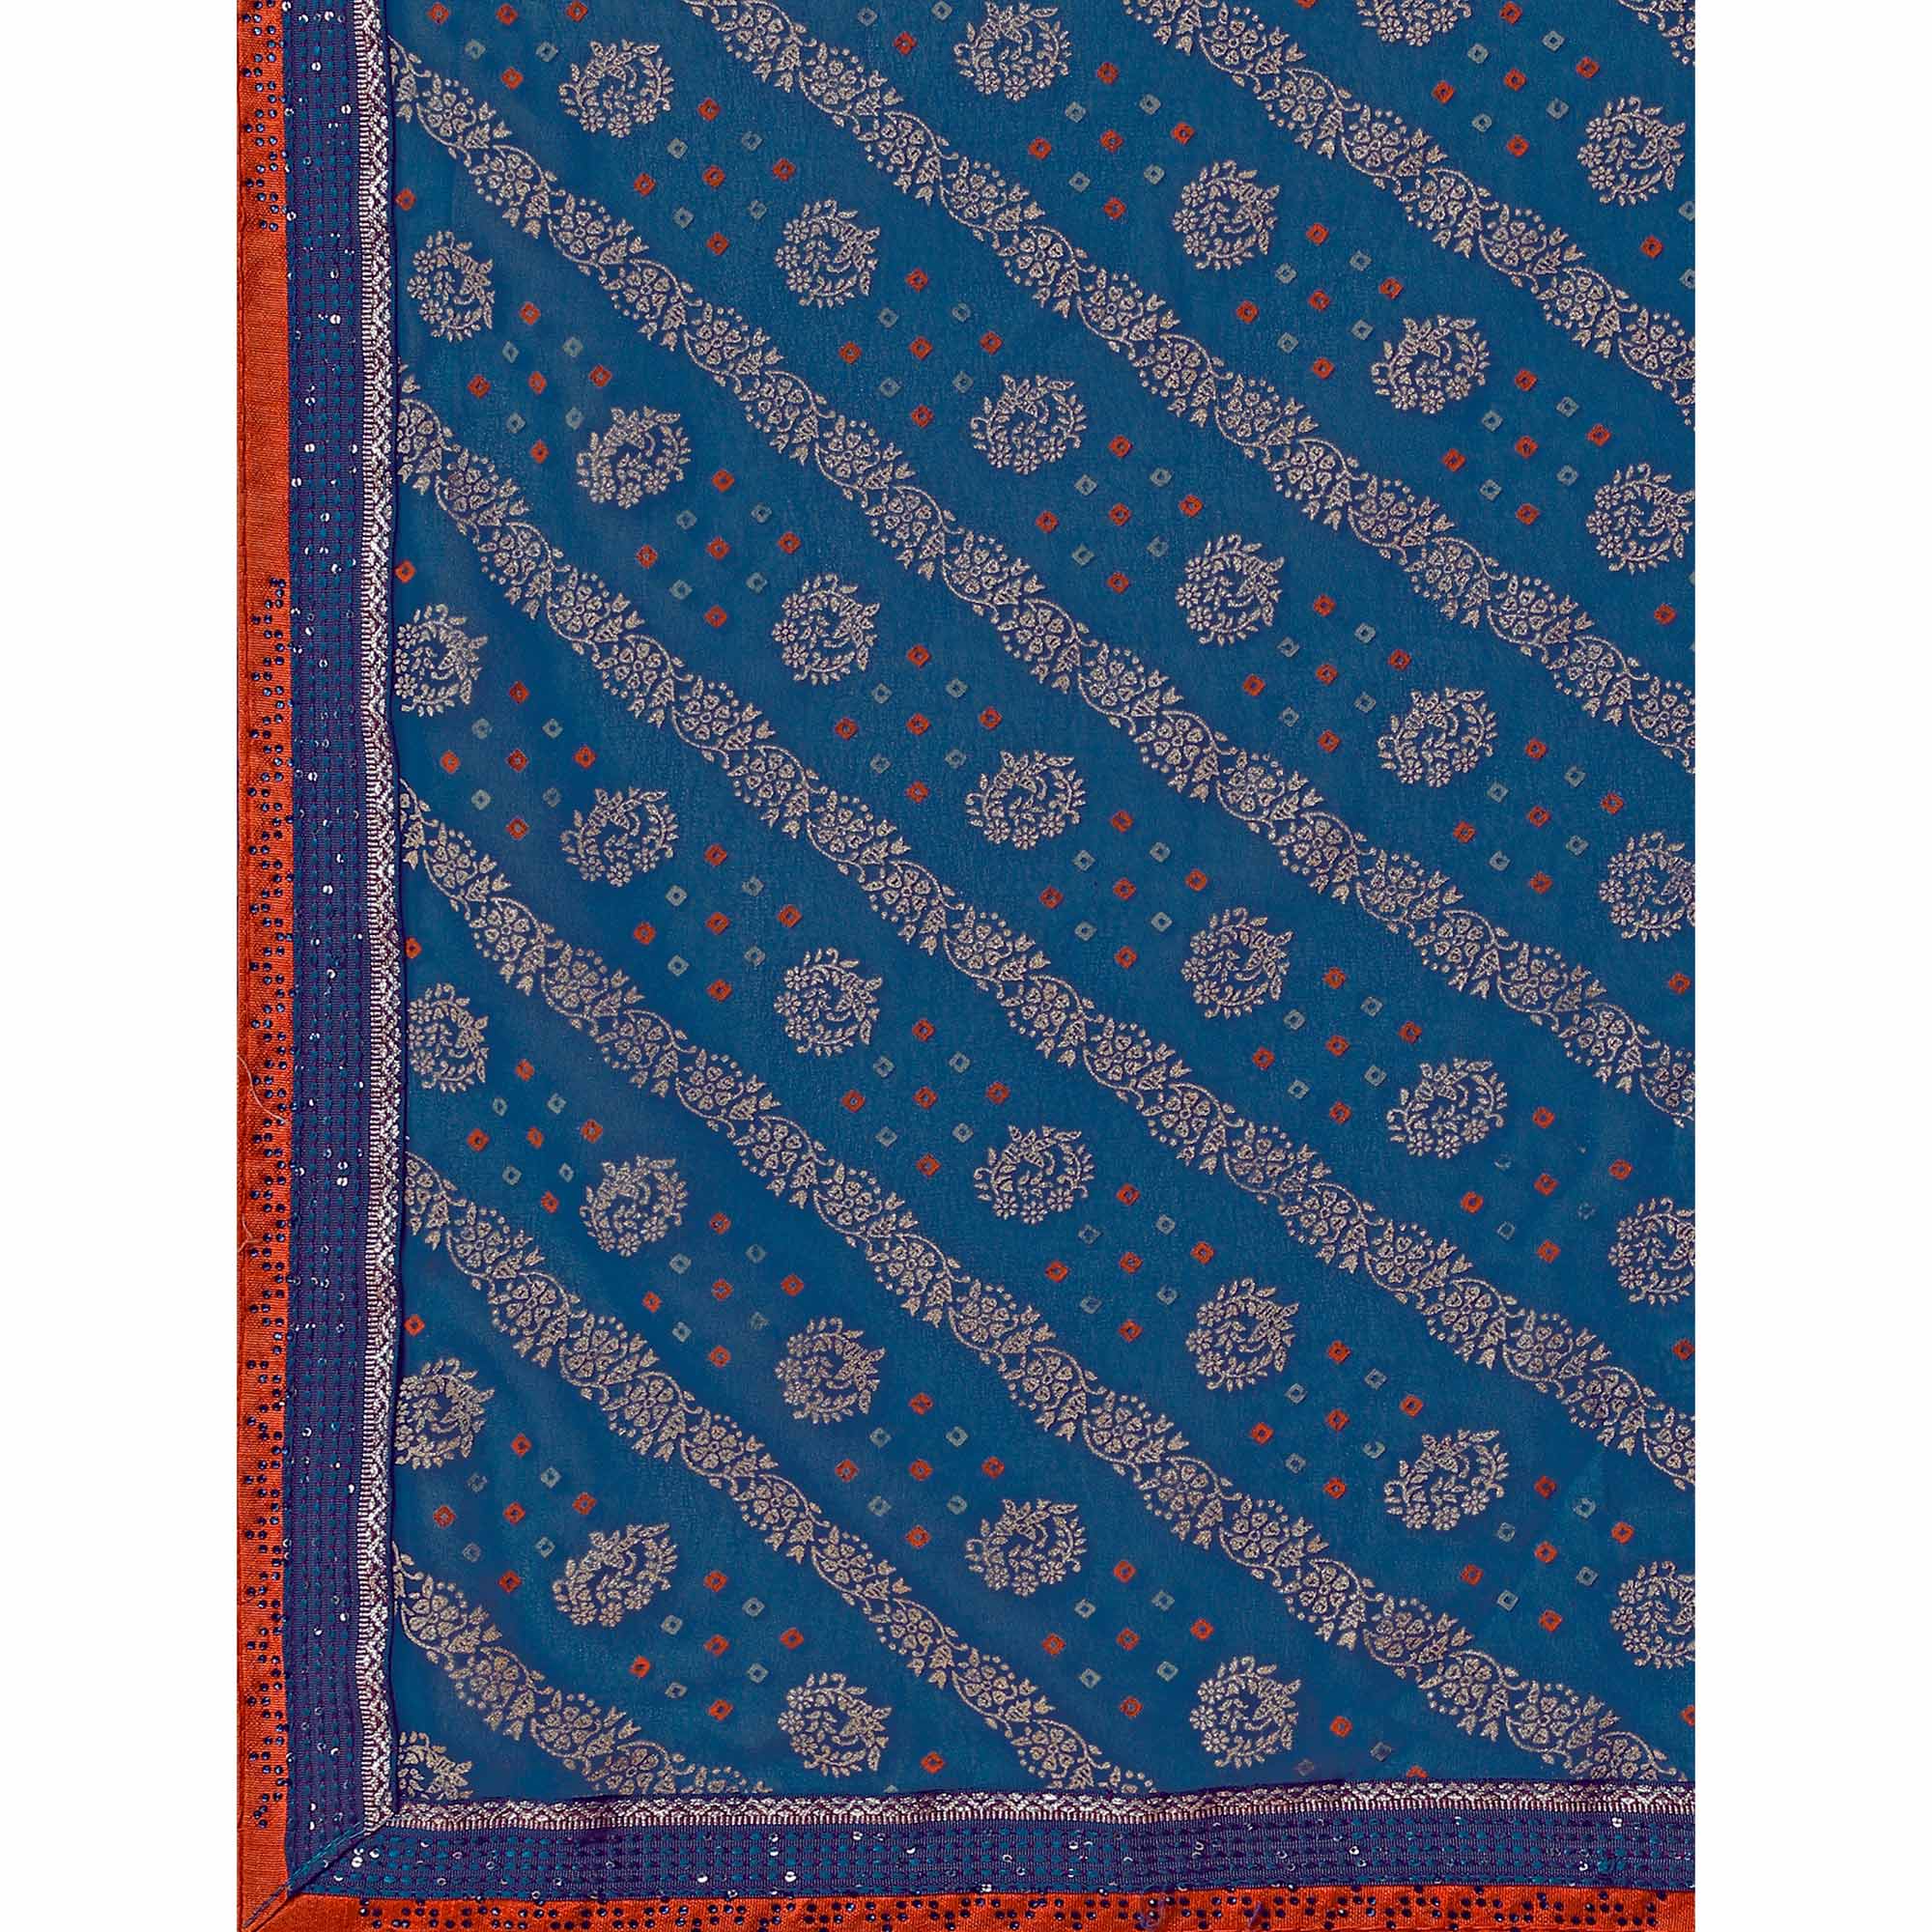 Blue Floral Foil Printed Chiffon Saree With Lace Border